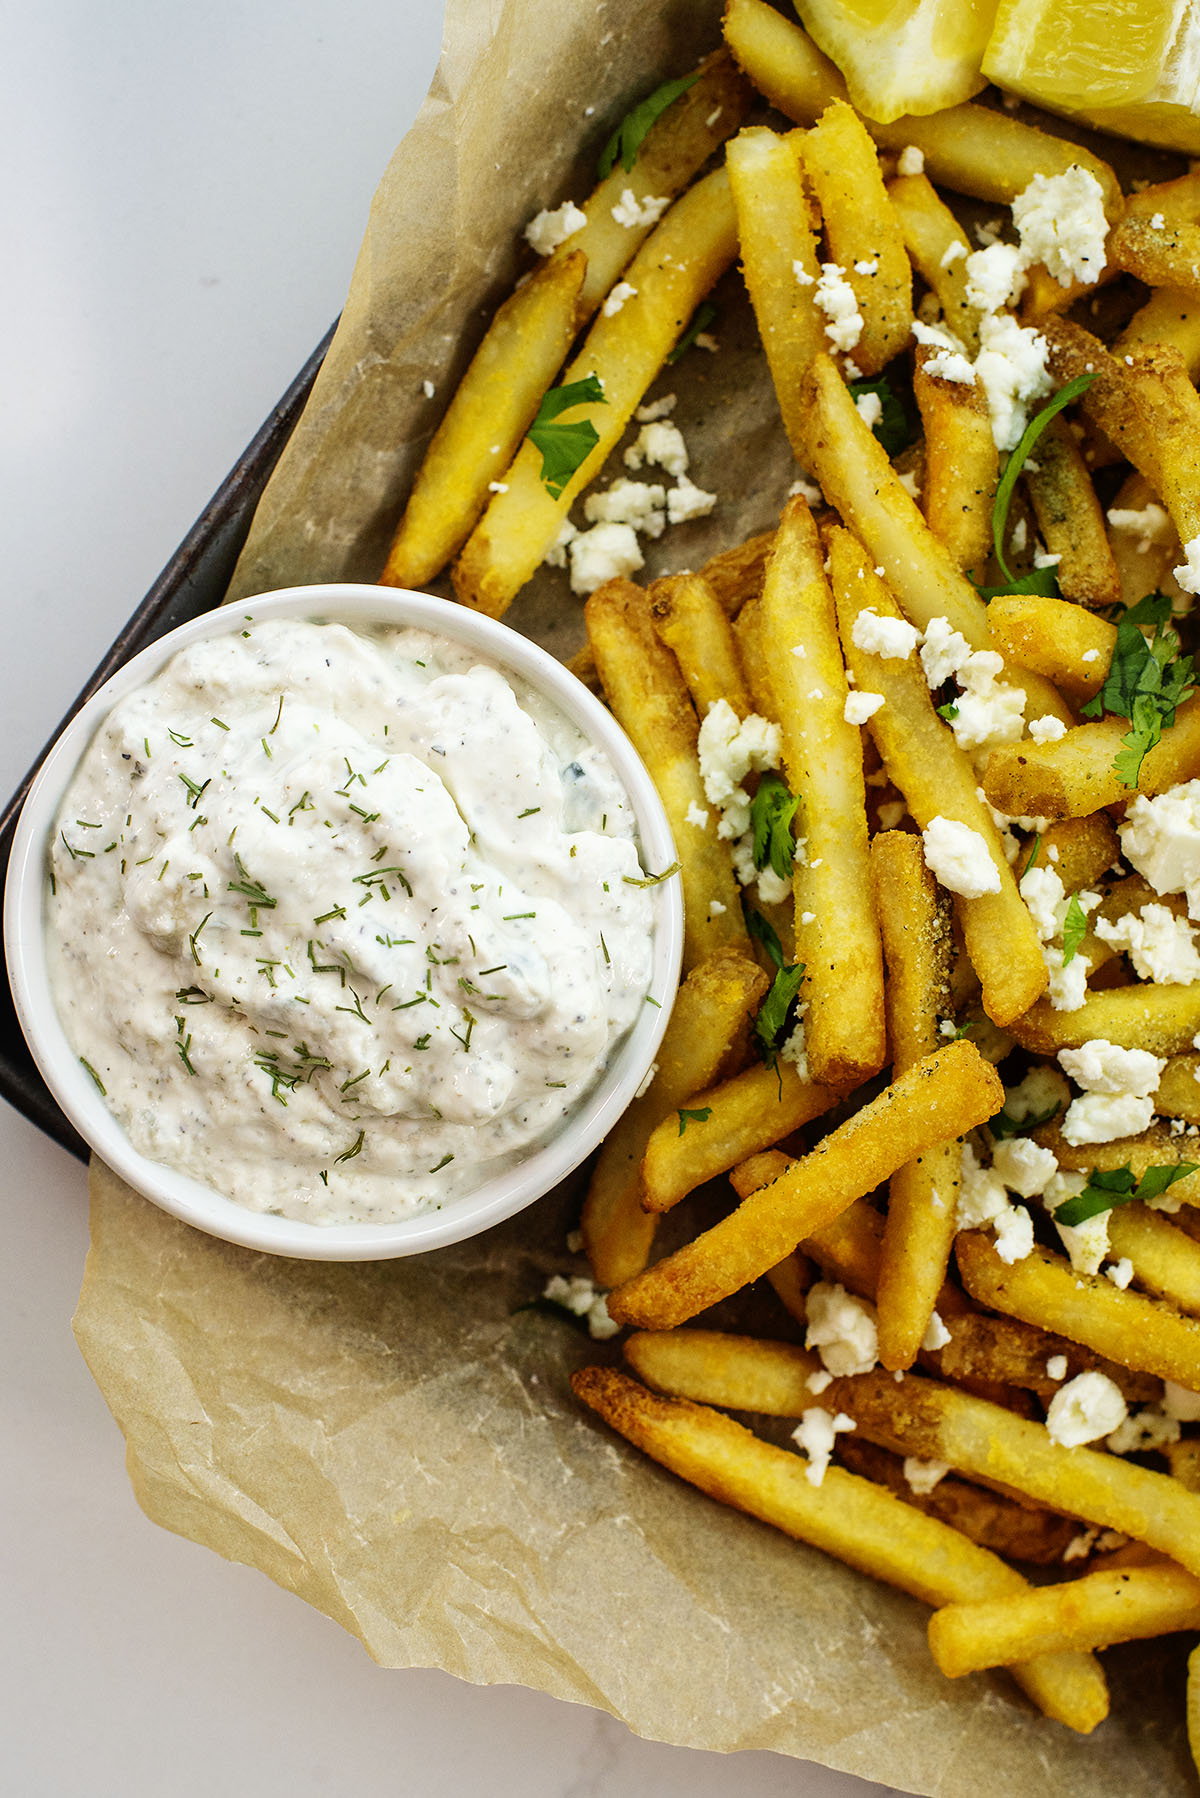 Close up of French fries with feta cheese and seasoning on them with a cup of tatziki sauce.